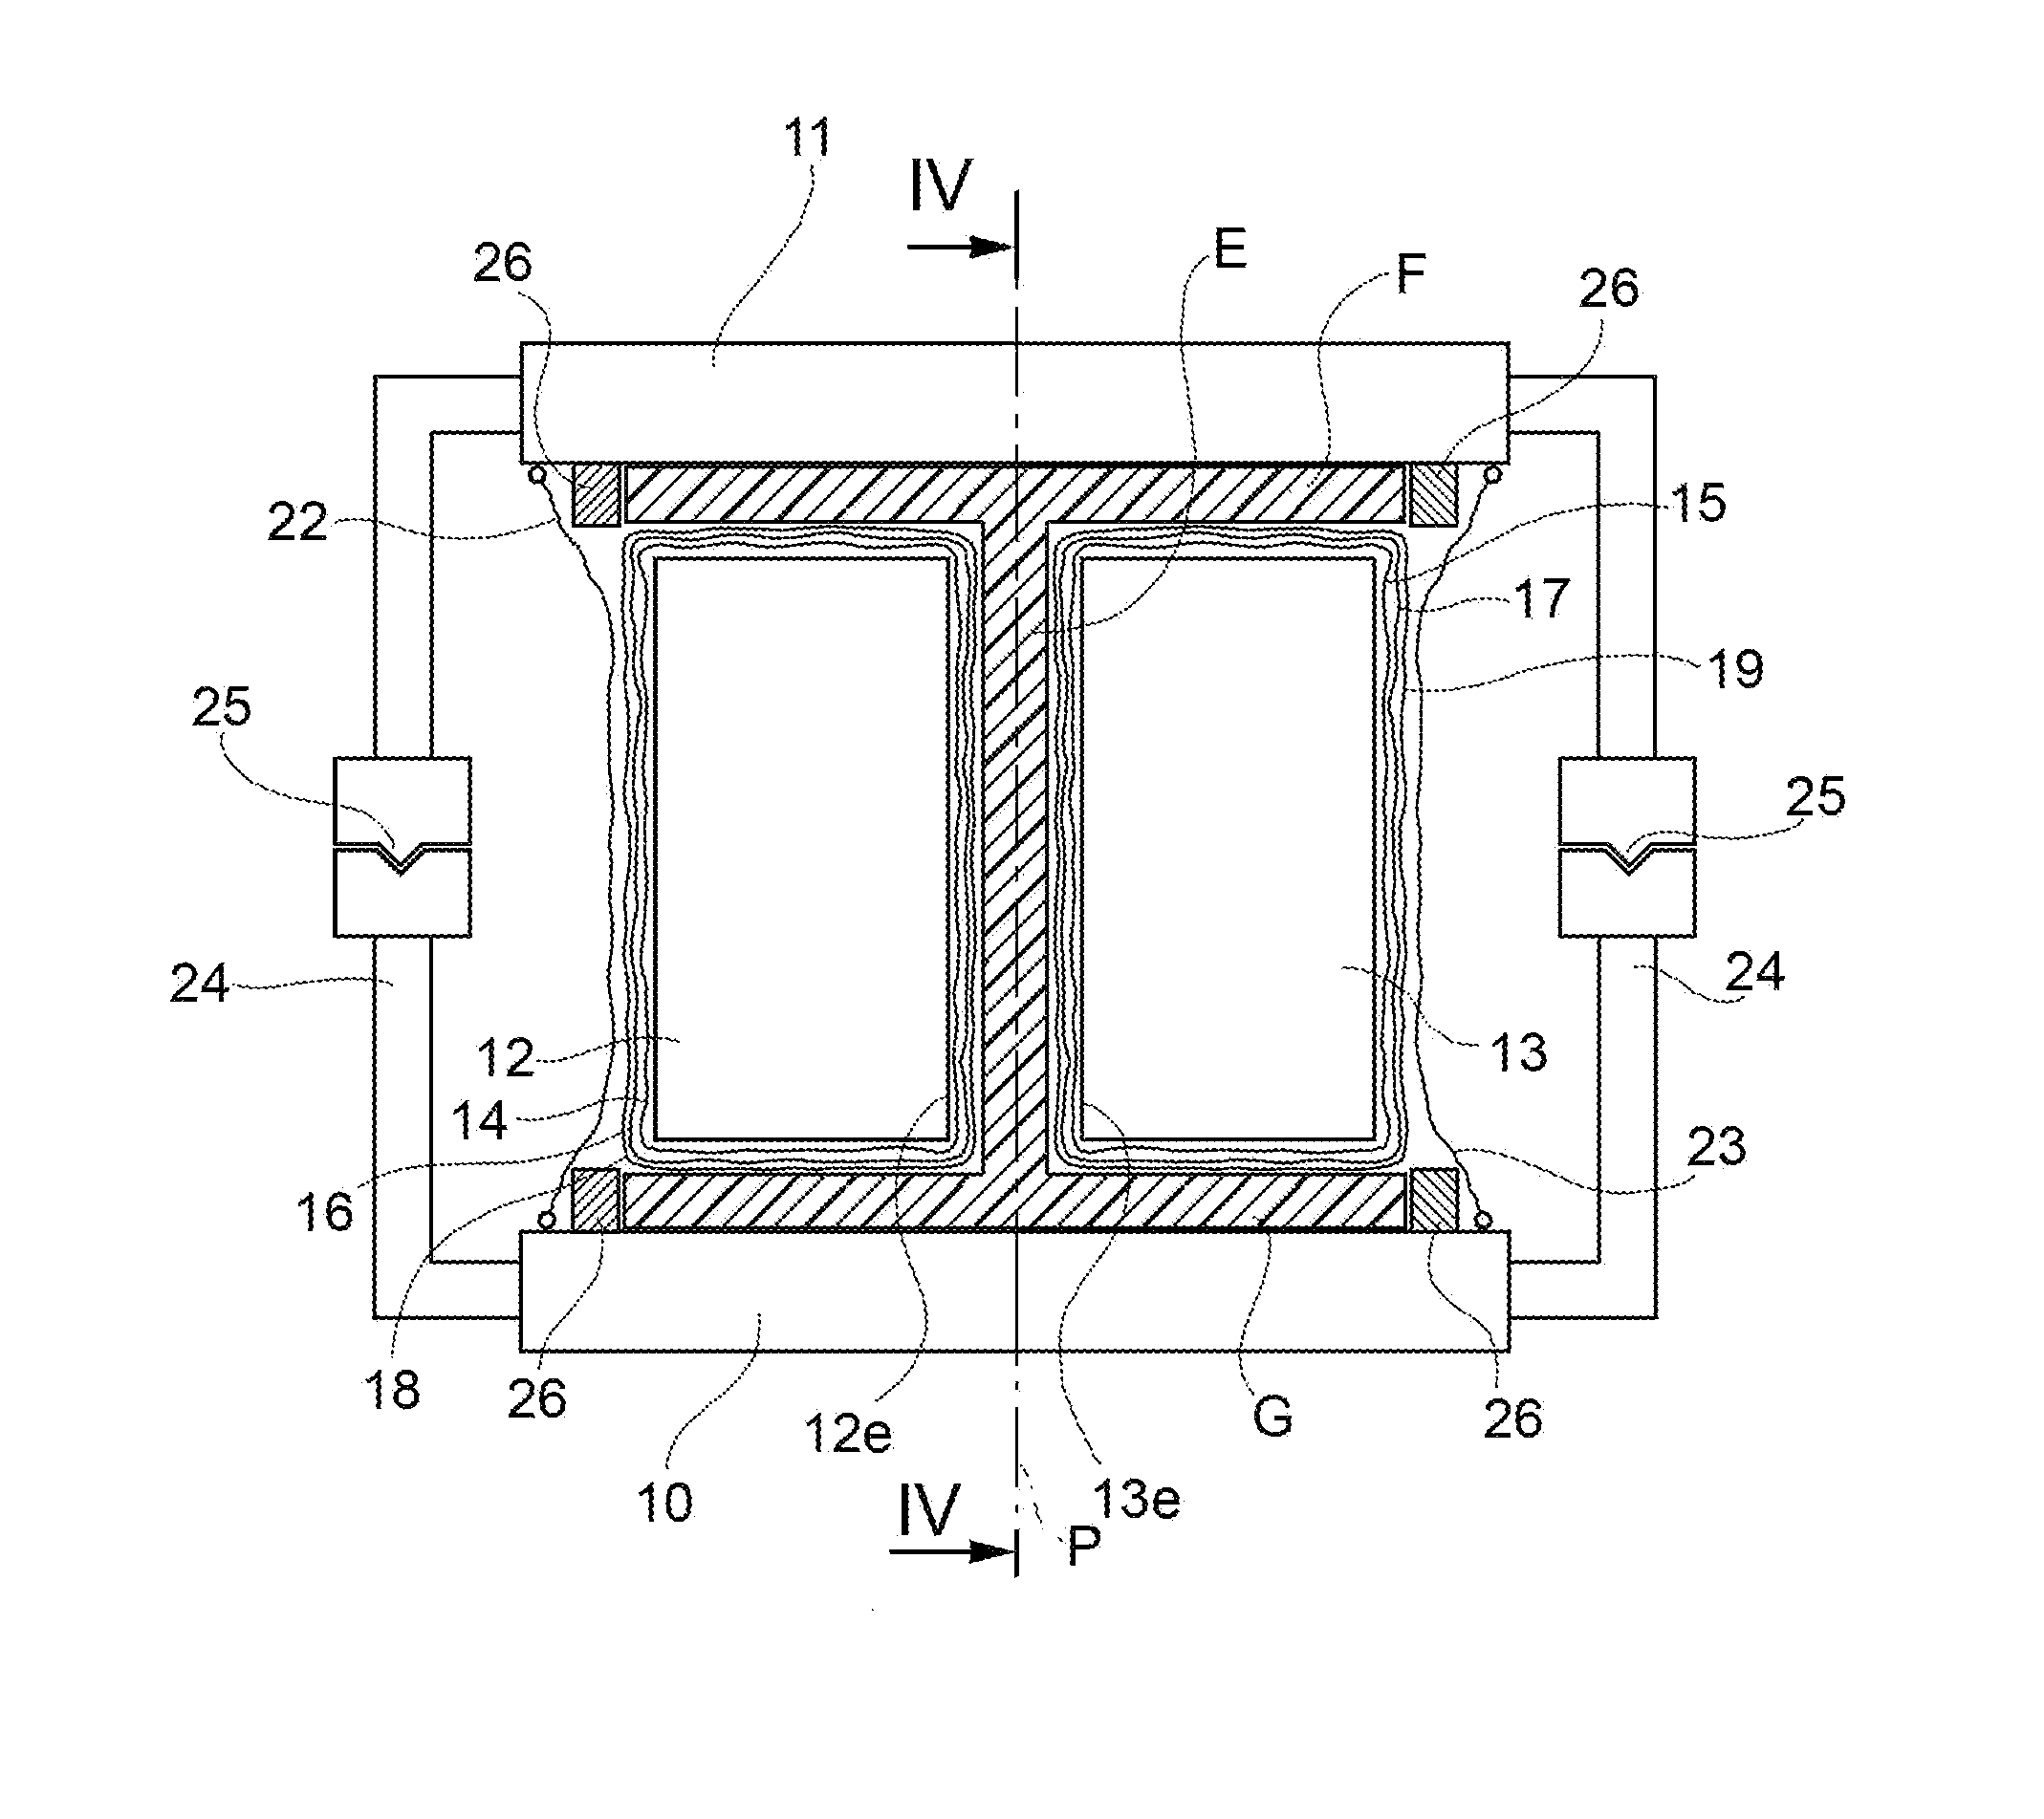 Method of manufacturing spars, longerons and fuselage beams having a variable h cross-section